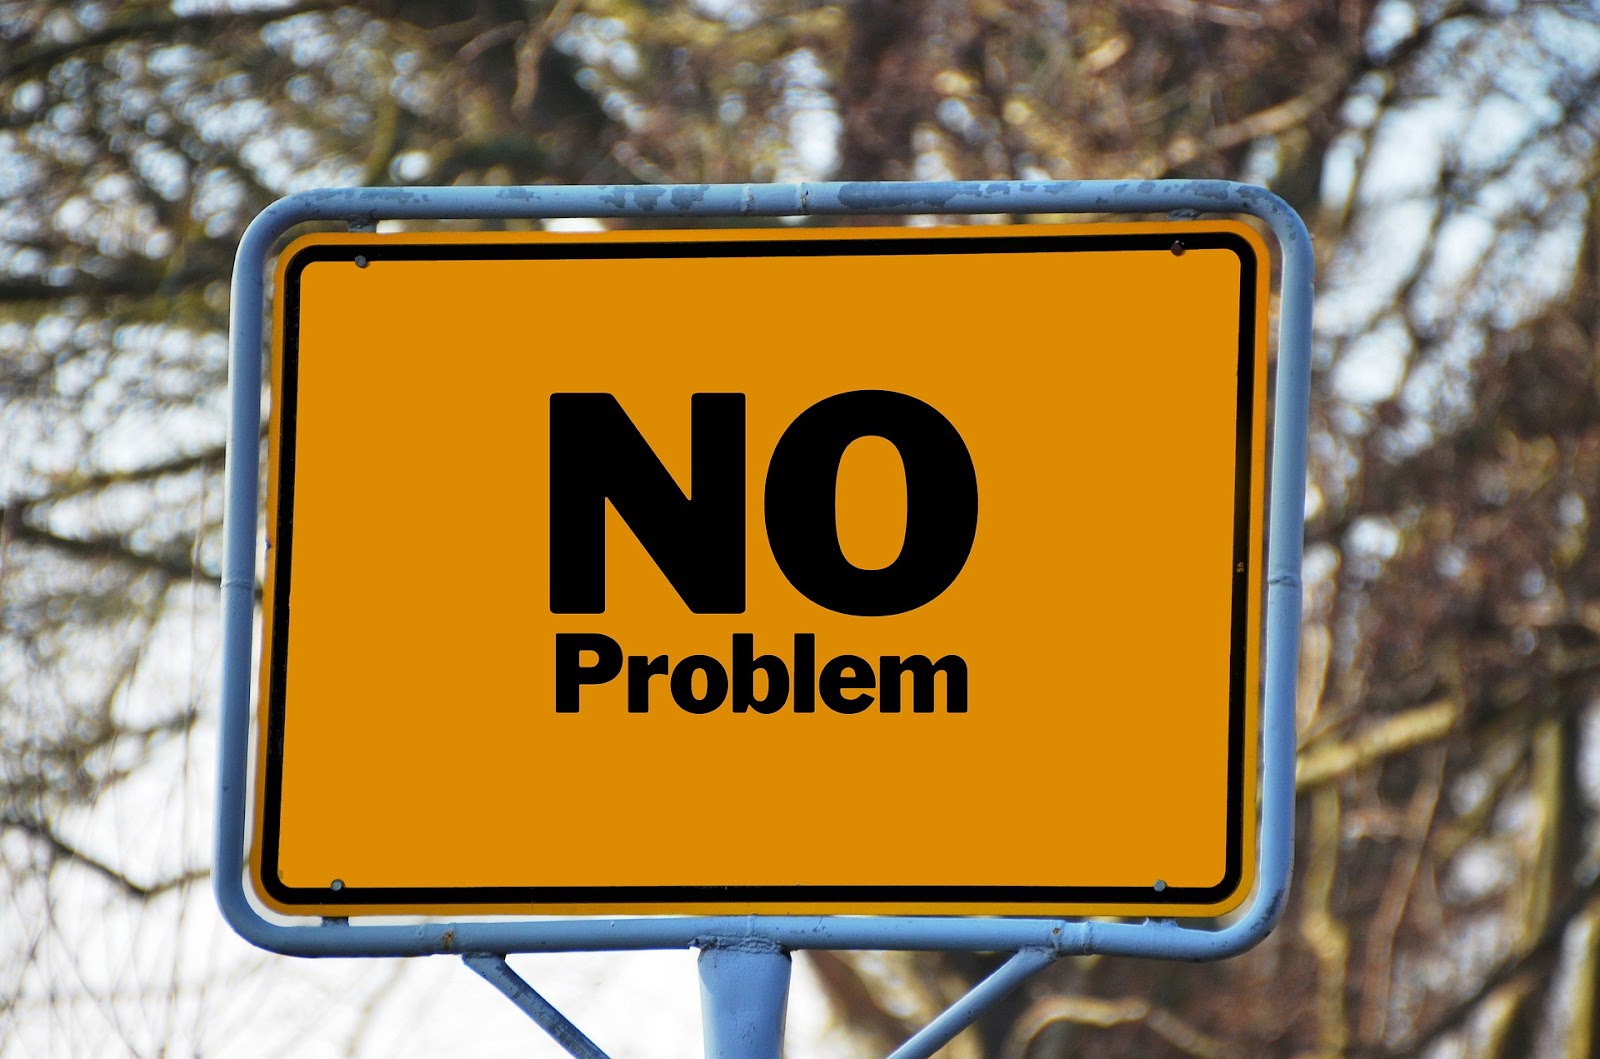 A yellow road sign displaying the words No Problem